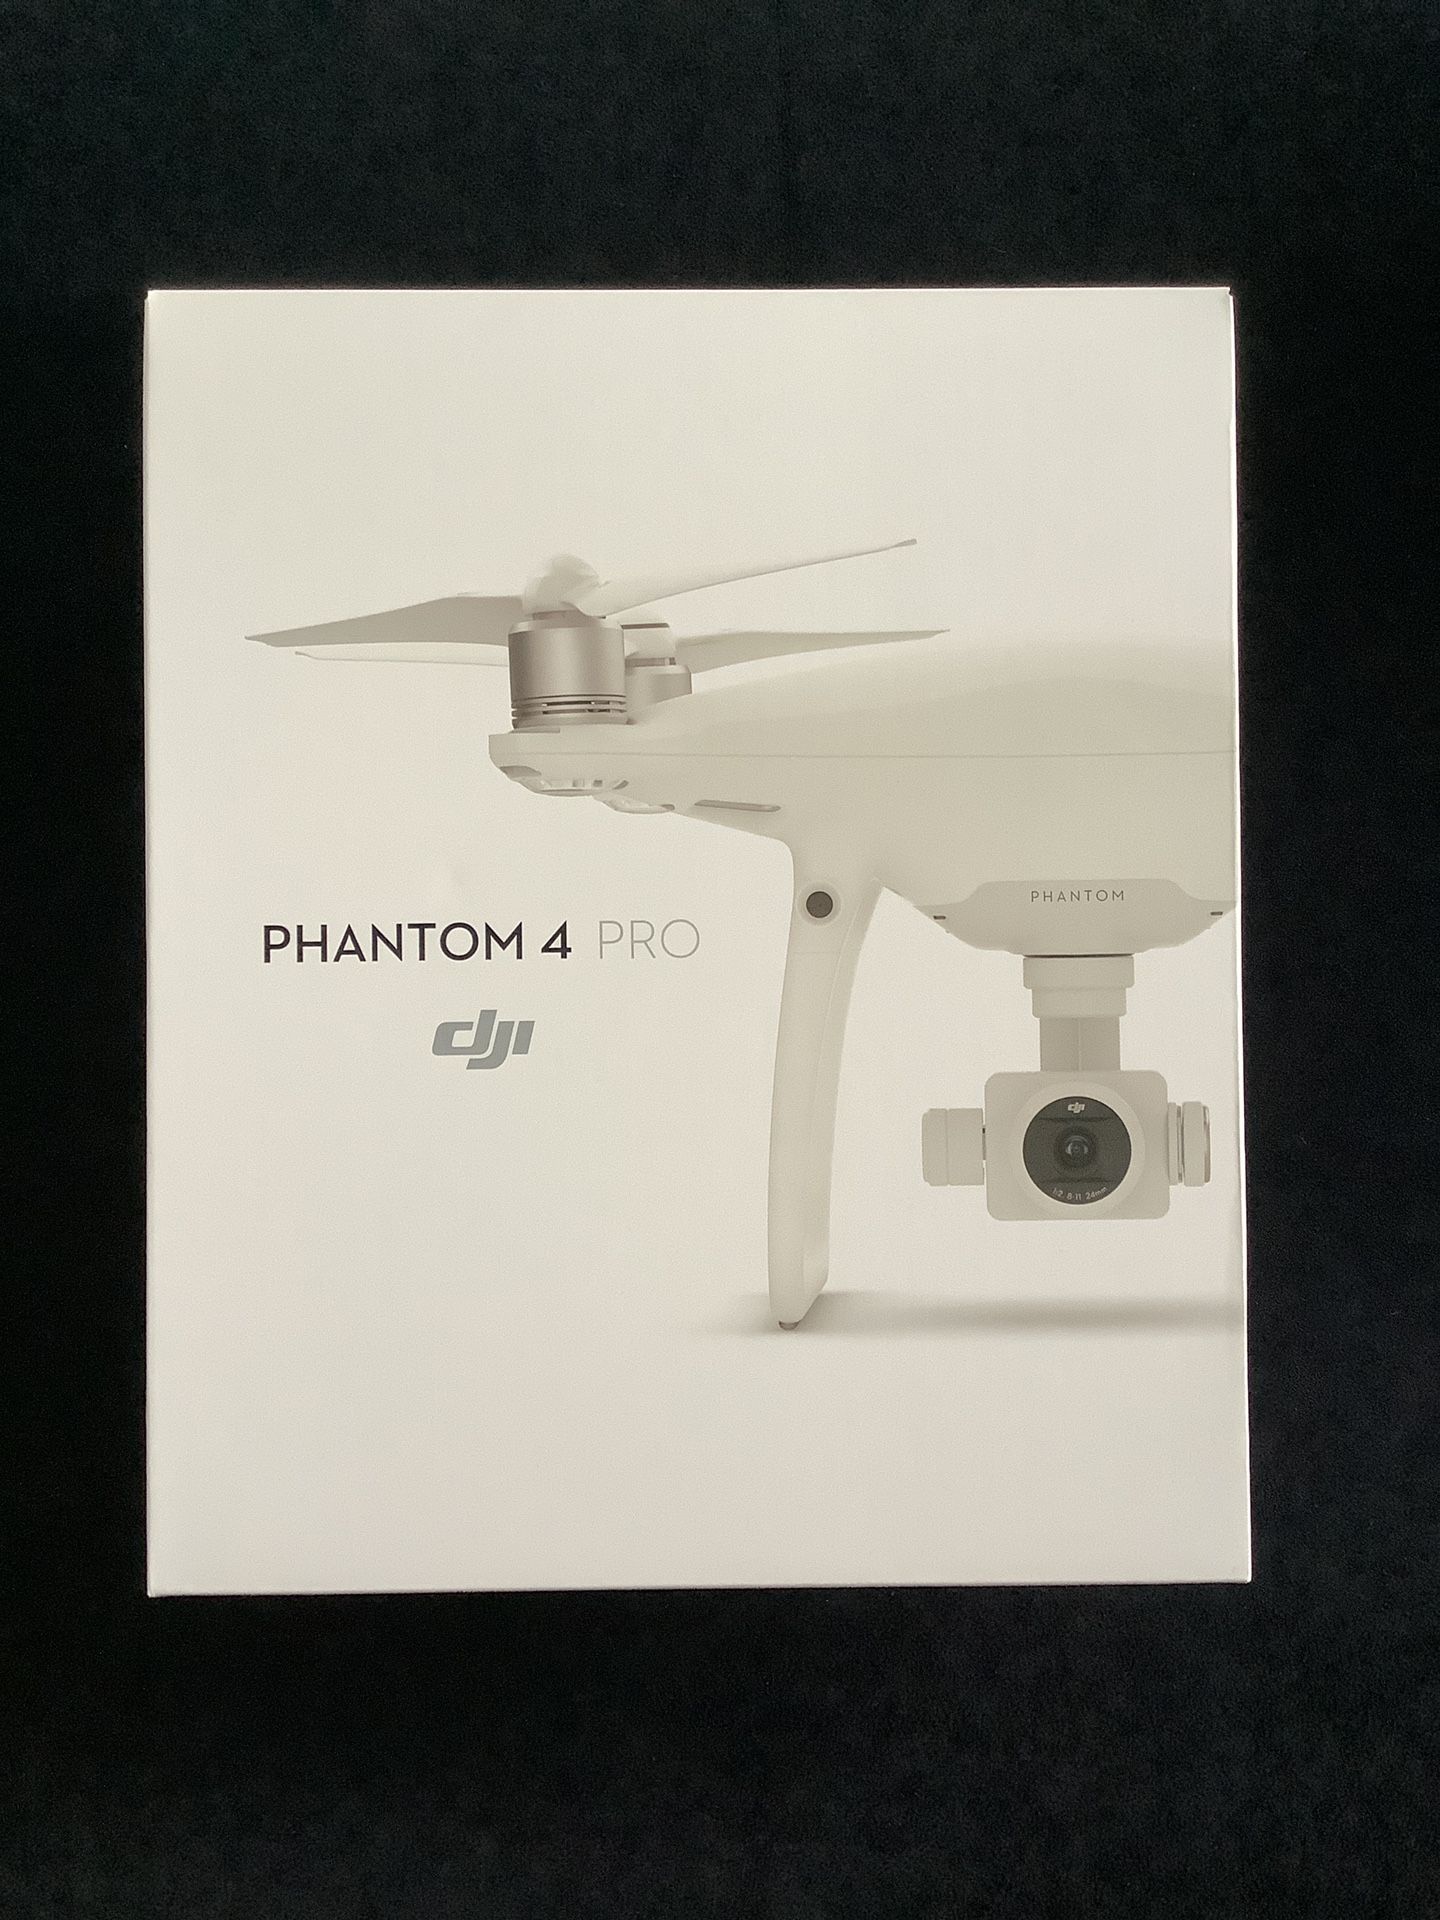 DJI Phantom 4 Pro Drone with MANY extras! Fully loaded Package!